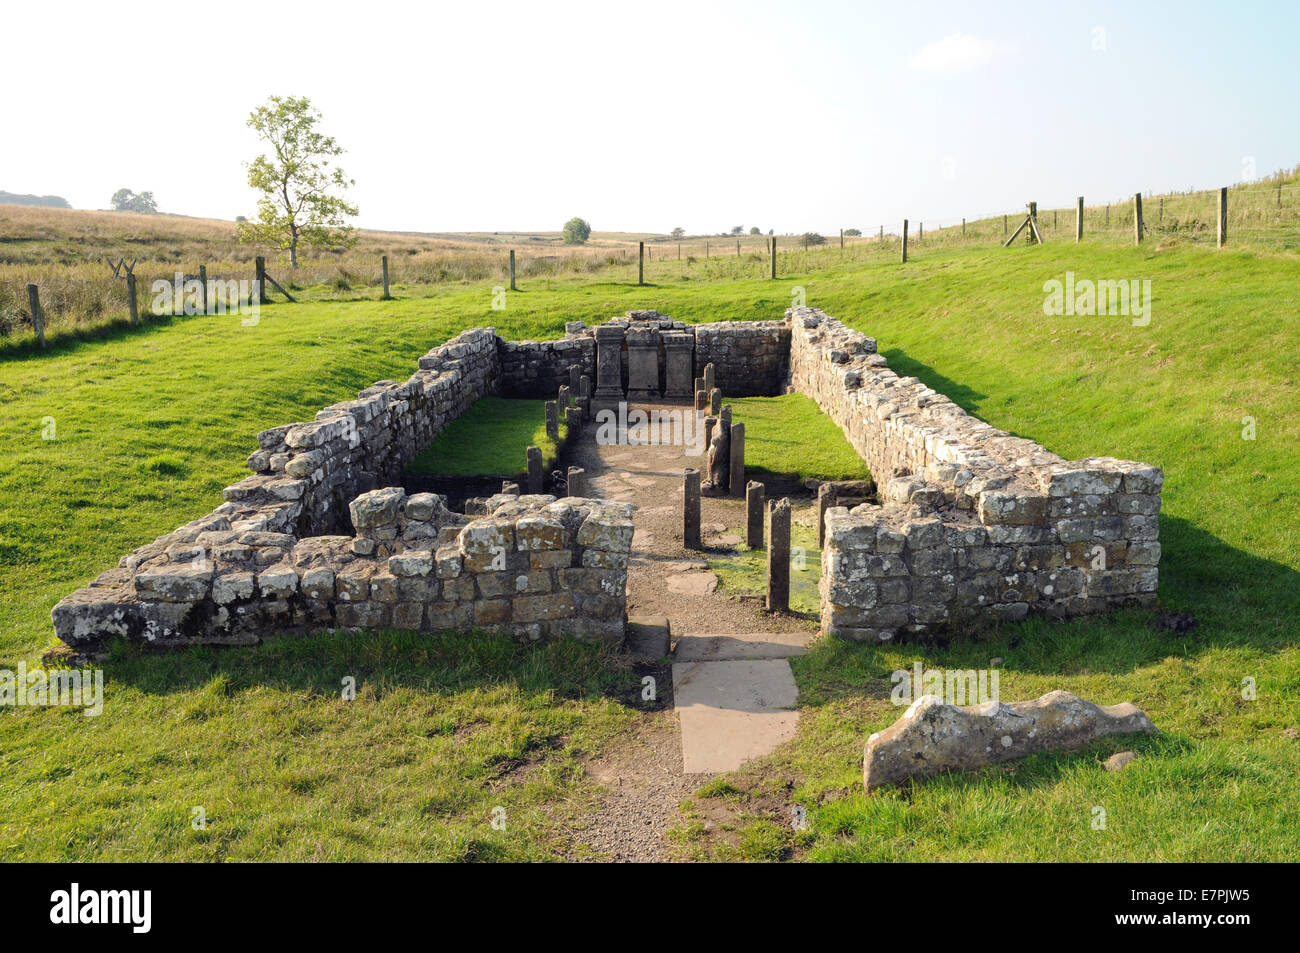 Overview of the Mithraeum near Hadrian's Wall. The temple was dedicated to the god Mithras and was popular with Roman soldiers. Stock Photo